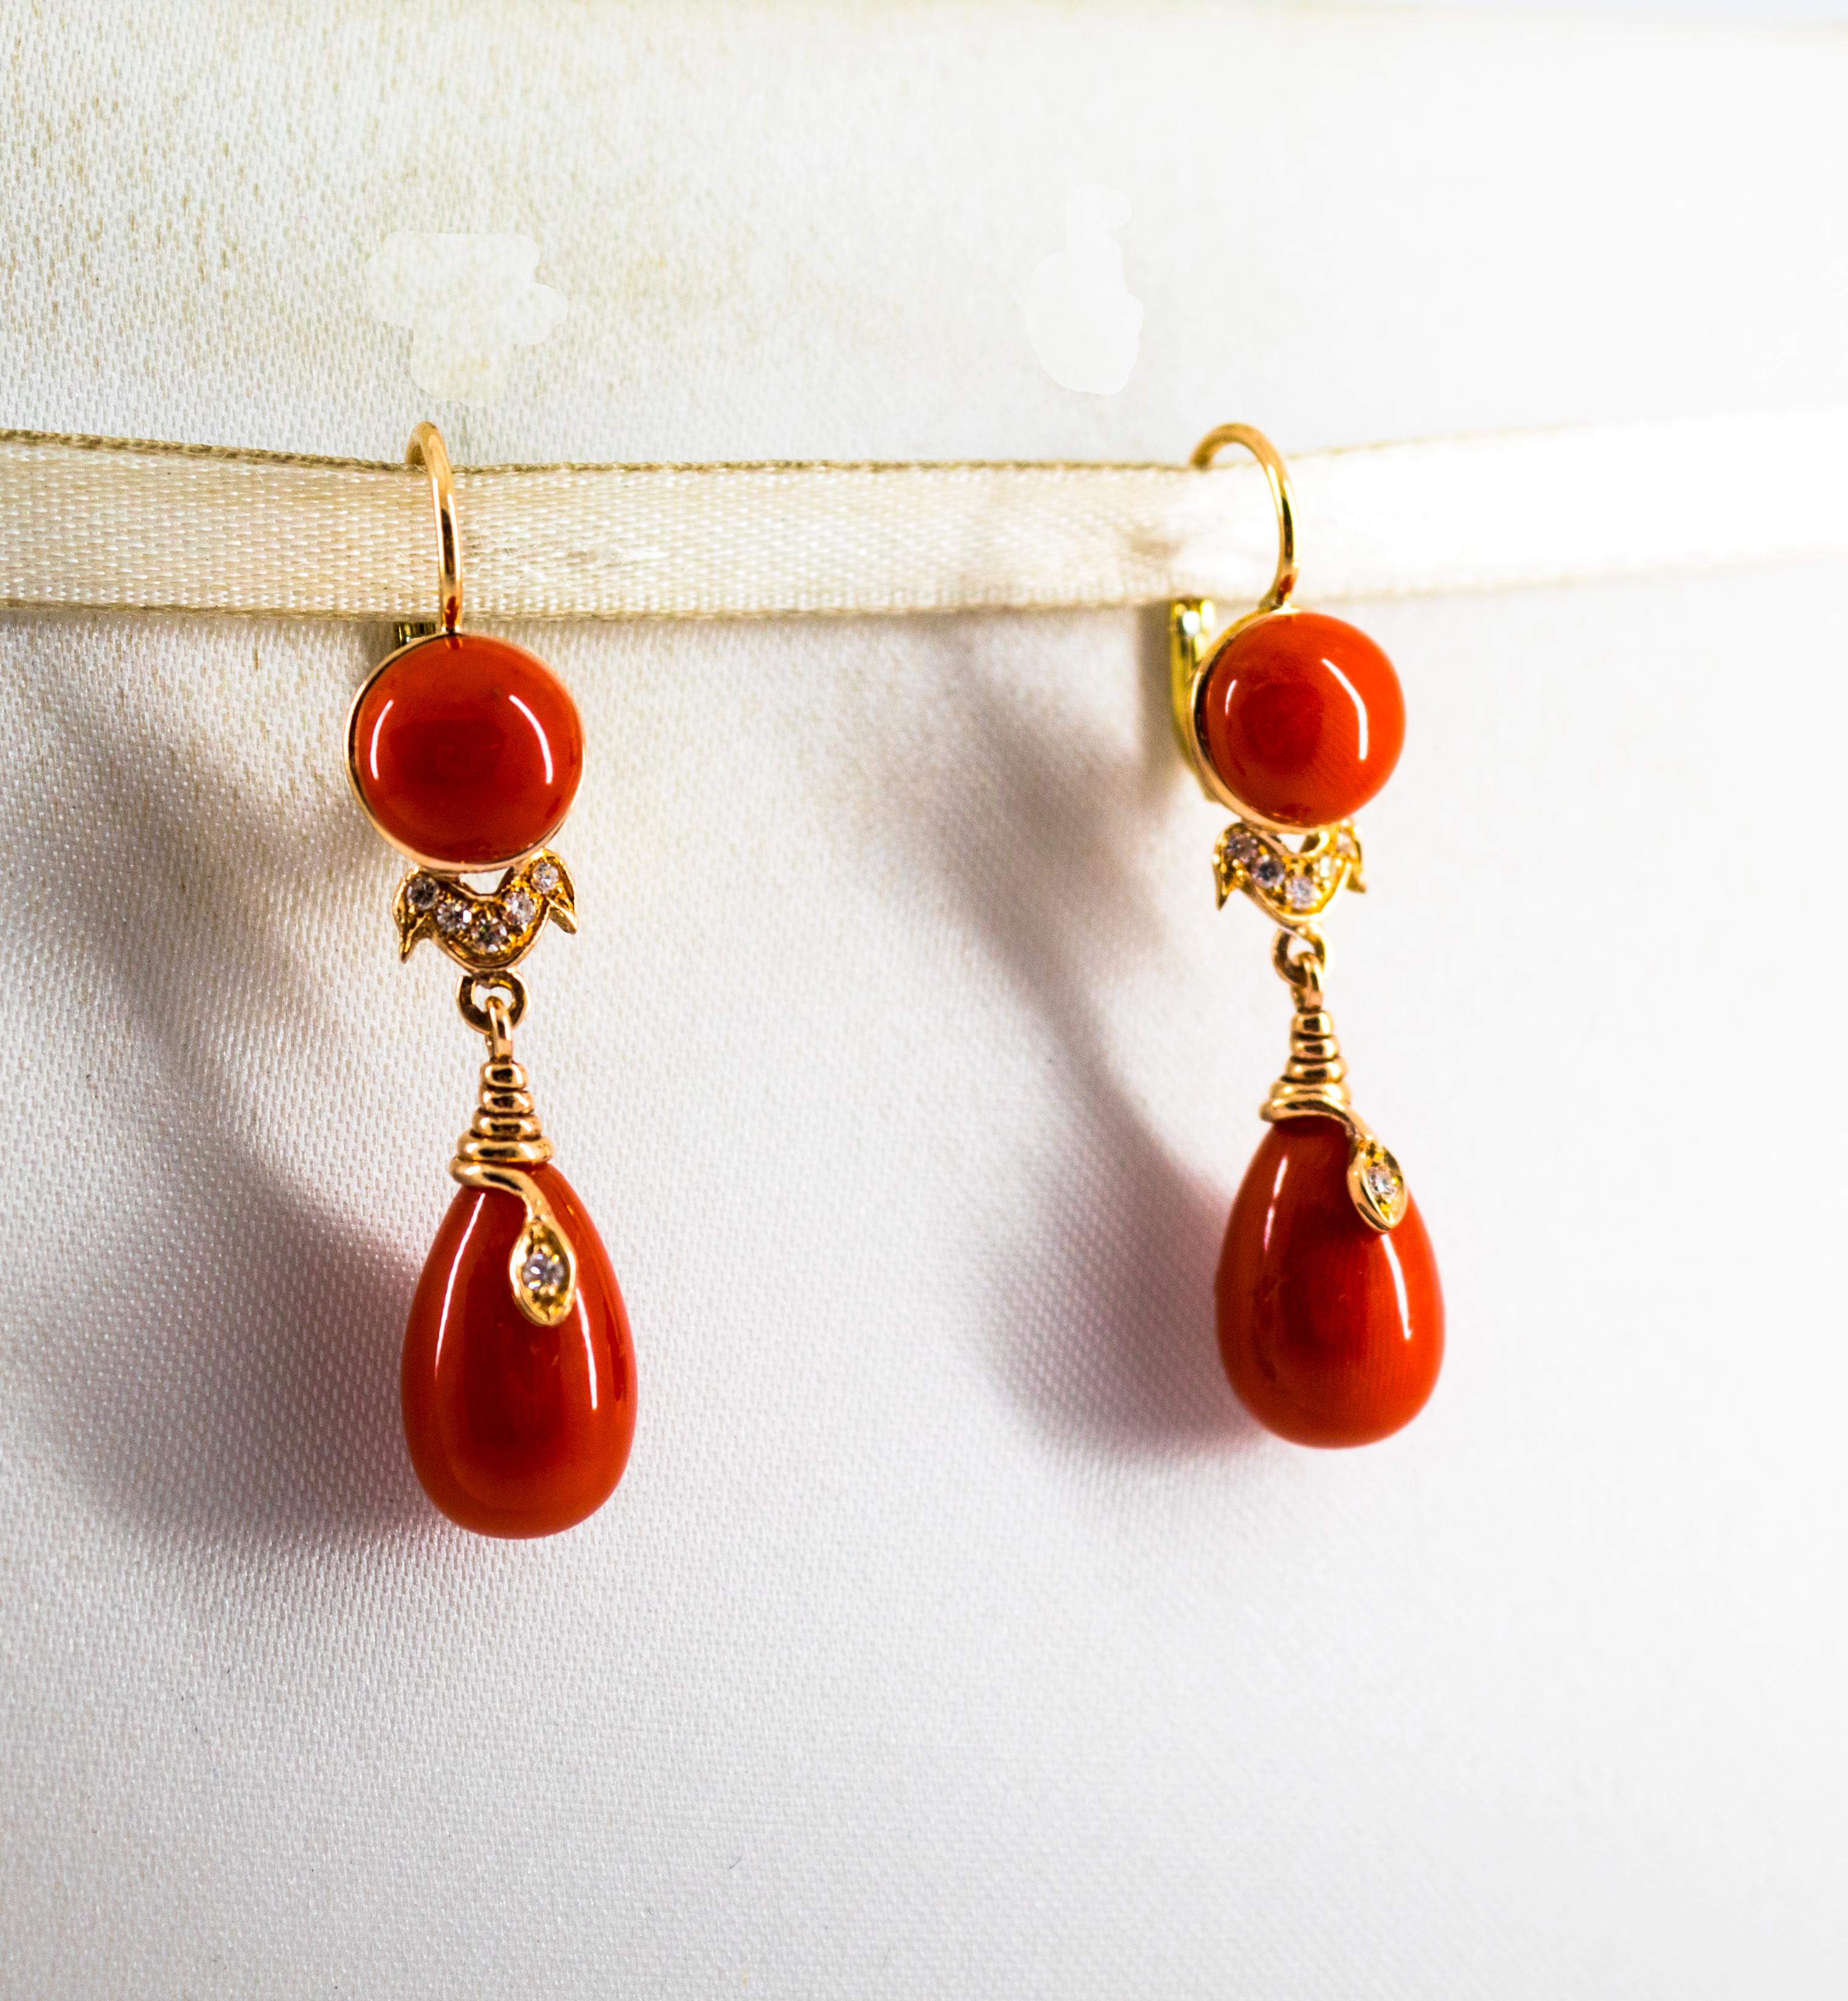 These Lever-Back Earrings are made of 14K Yellow Gold.
These Earrings have 0.14 Carats of White Diamonds.
These Earrings have Red Mediterranean (Sardinia, Italy) Coral.
All our Earrings have pins for pierced ears but we can change the closure and